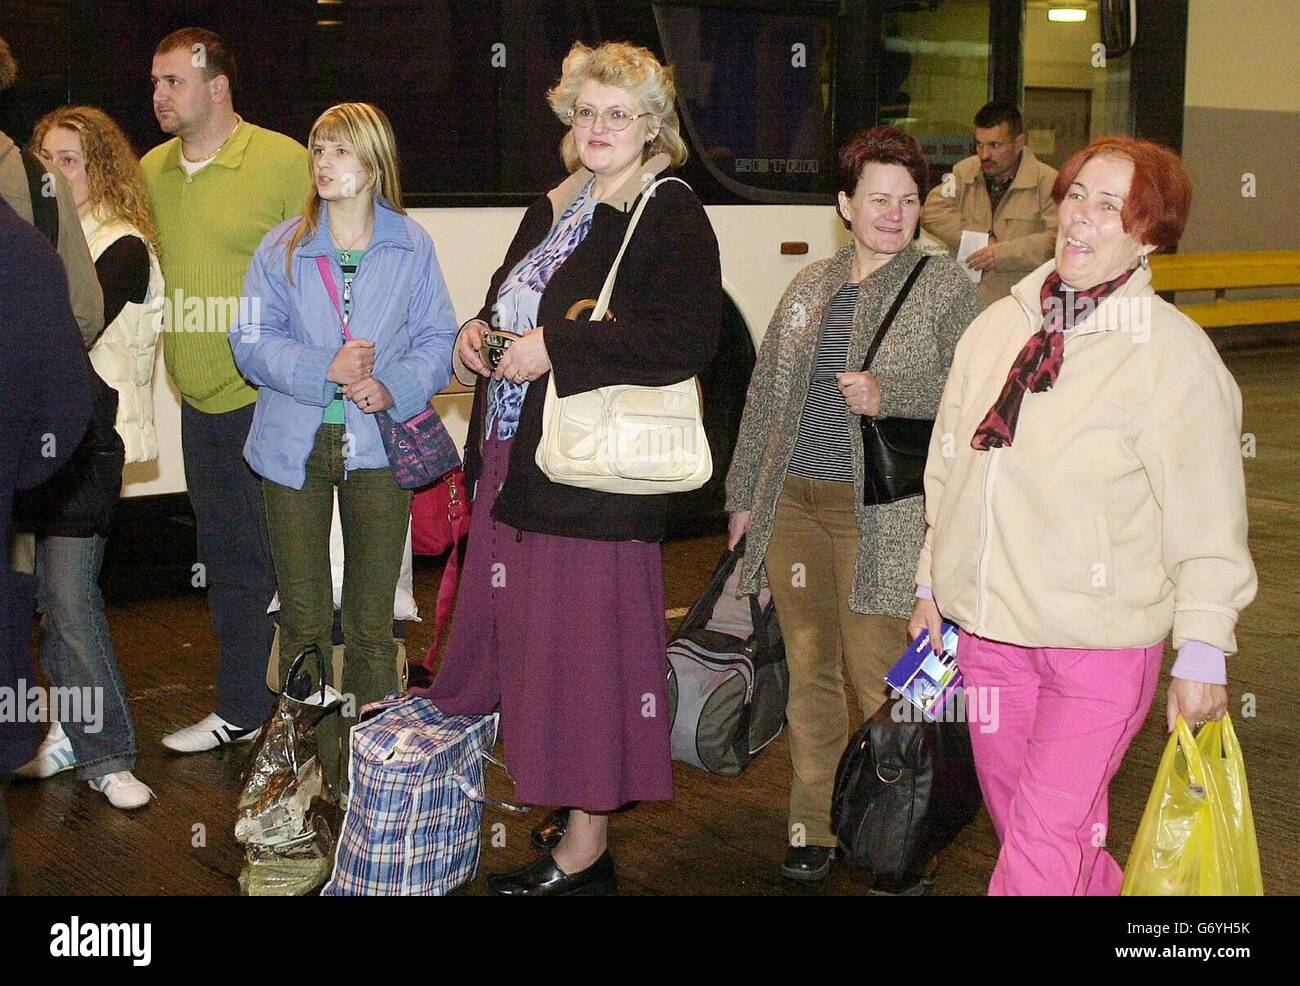 People from Lithuania arrive at Victoria Coach Station, on the day that the country joined the European Union. Migrant workers from the new countries joining the European Union today are to be given information from the TUC about their rights if they find work in the UK. The union organisation said workers from the new EU countries needed straightforward advice on their rights and how they should be treated by UK companies. Stock Photo